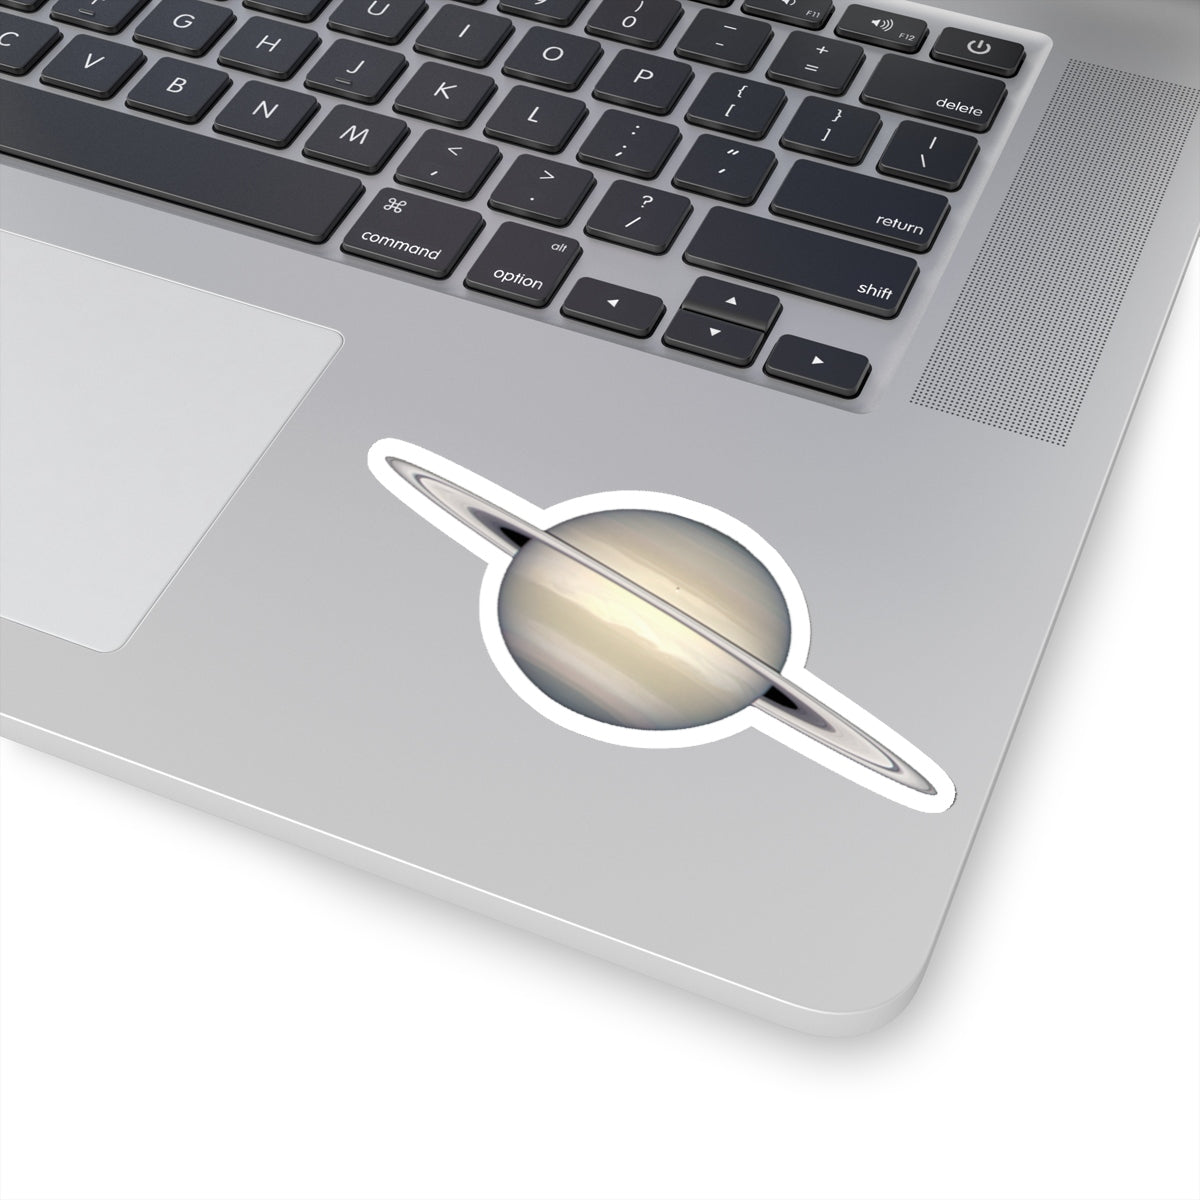 Saturn Decal, Planet Space Stickers Laptop Vinyl Waterproof Waterbottle Car Bumper Aesthetic Label Wall Phone Mural Decal Die Cut Starcove Fashion